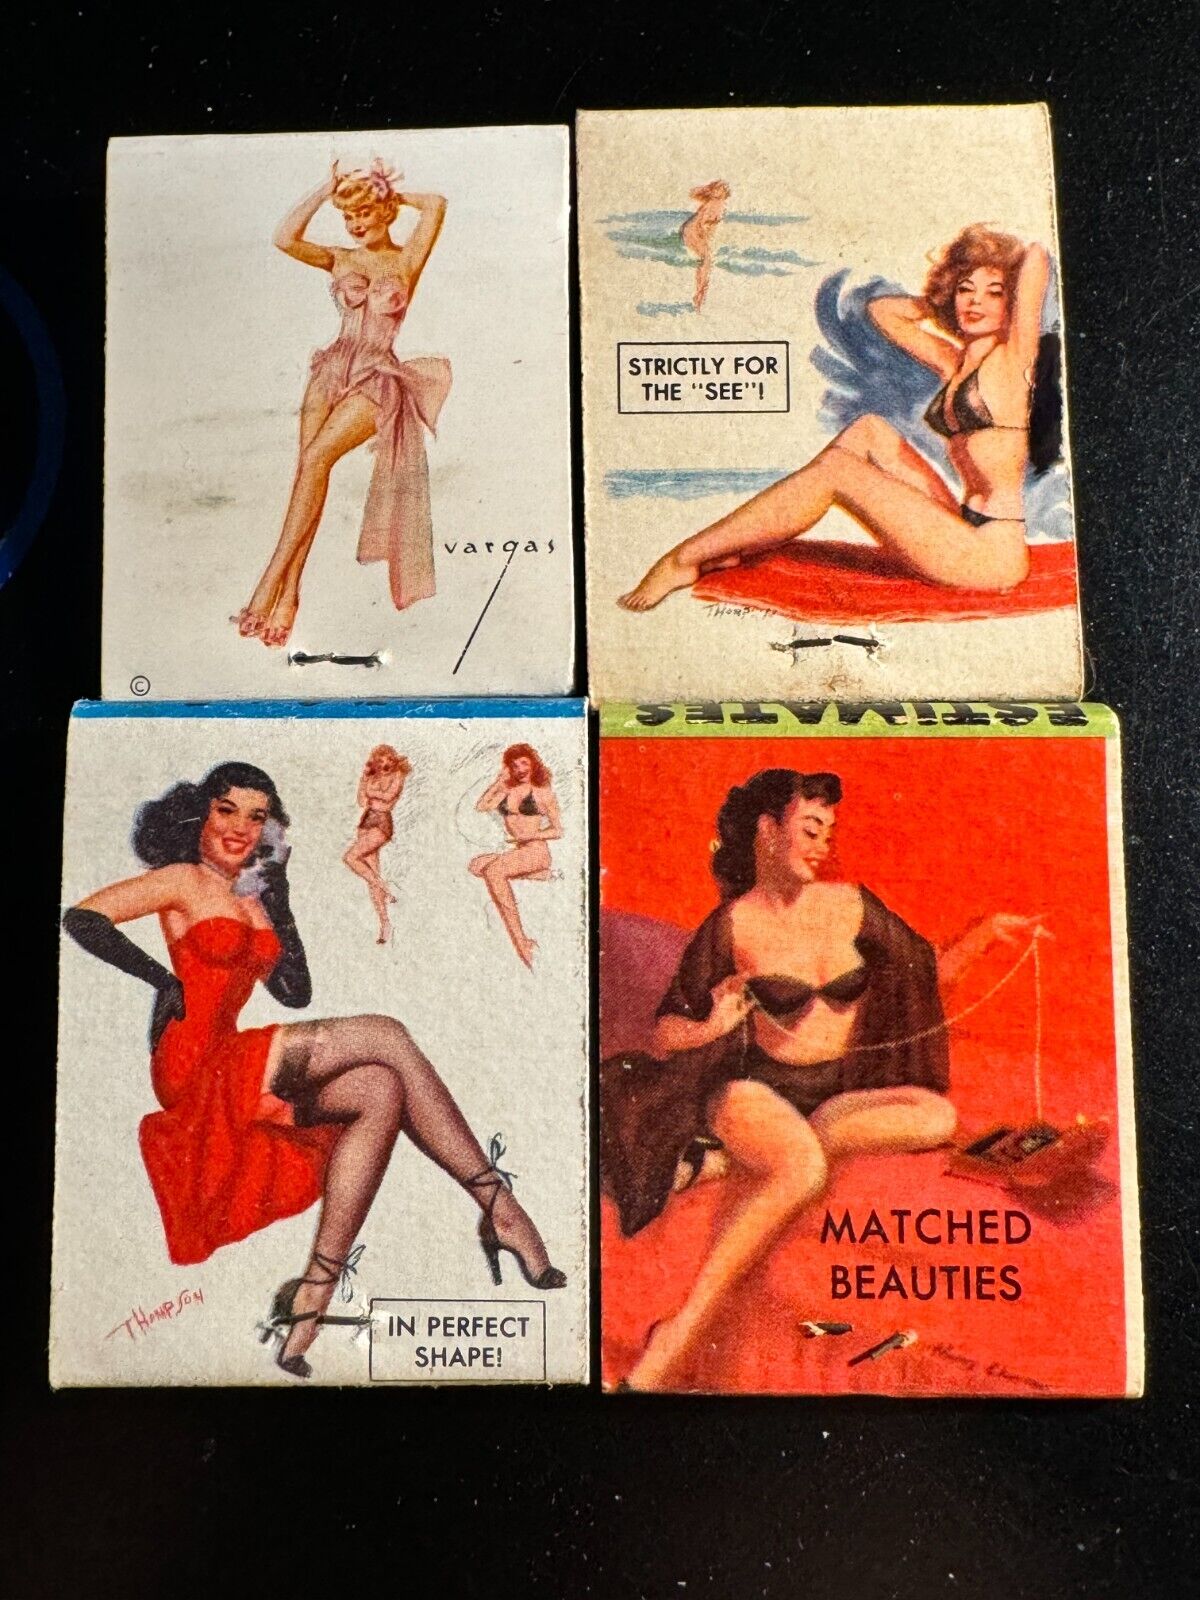 MATCHBOOK - 4 PIN-UPS - VARGAS - MATCHED BEAUTIES - PERECT - SEE - UNSTRUCK